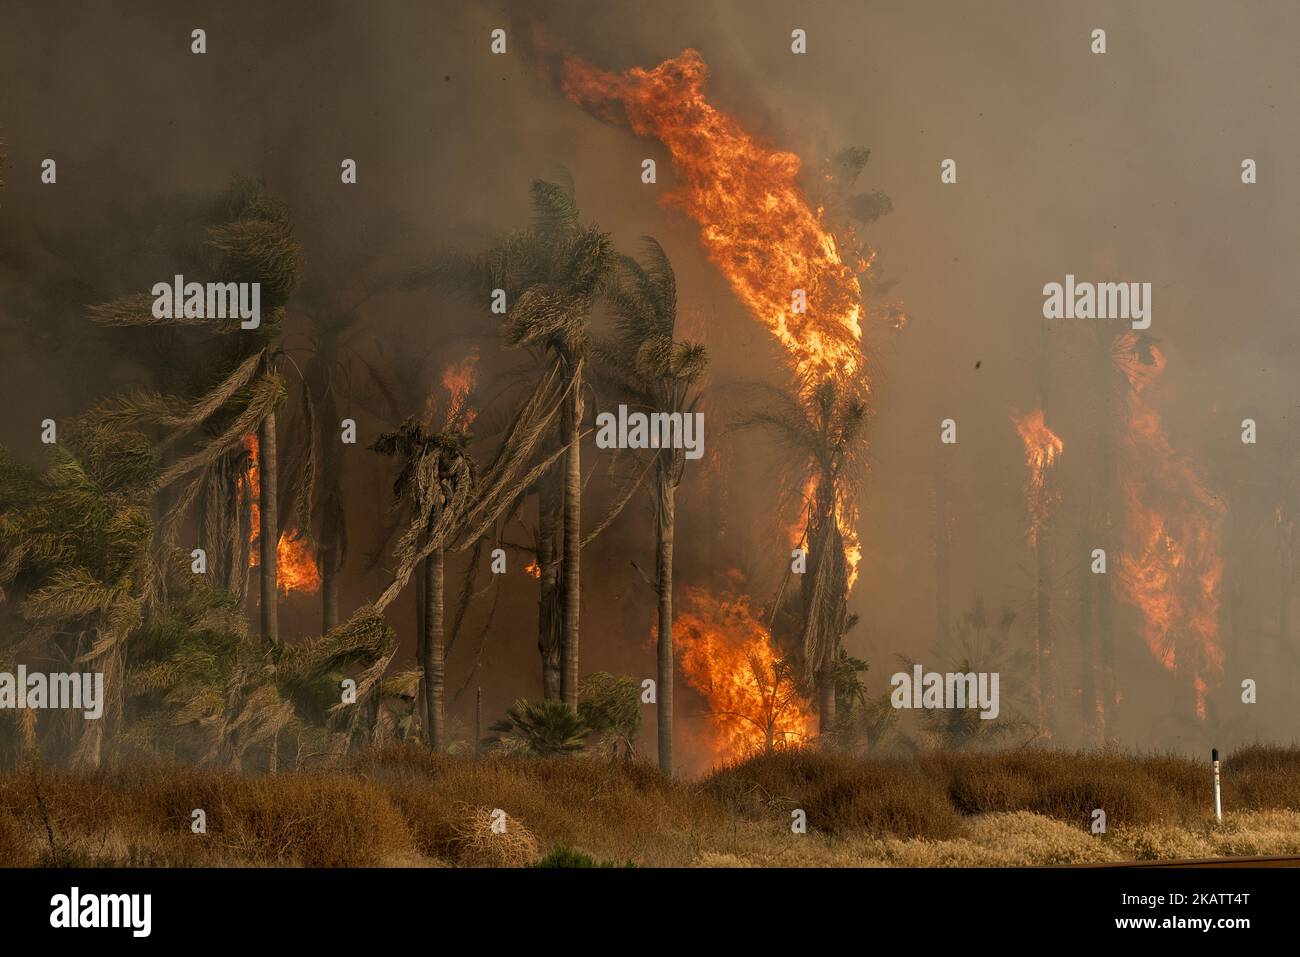 Palm trees in flames as the Thomas wildfire rages in Ventura, California on December 7, 2017. Firefighters across Southern California are battling six major fires that are fueled by strong Santa Ana winds with wind gusts of 70 miles per hour. (Photo by Ronen Tivony/NurPhoto) Stock Photo